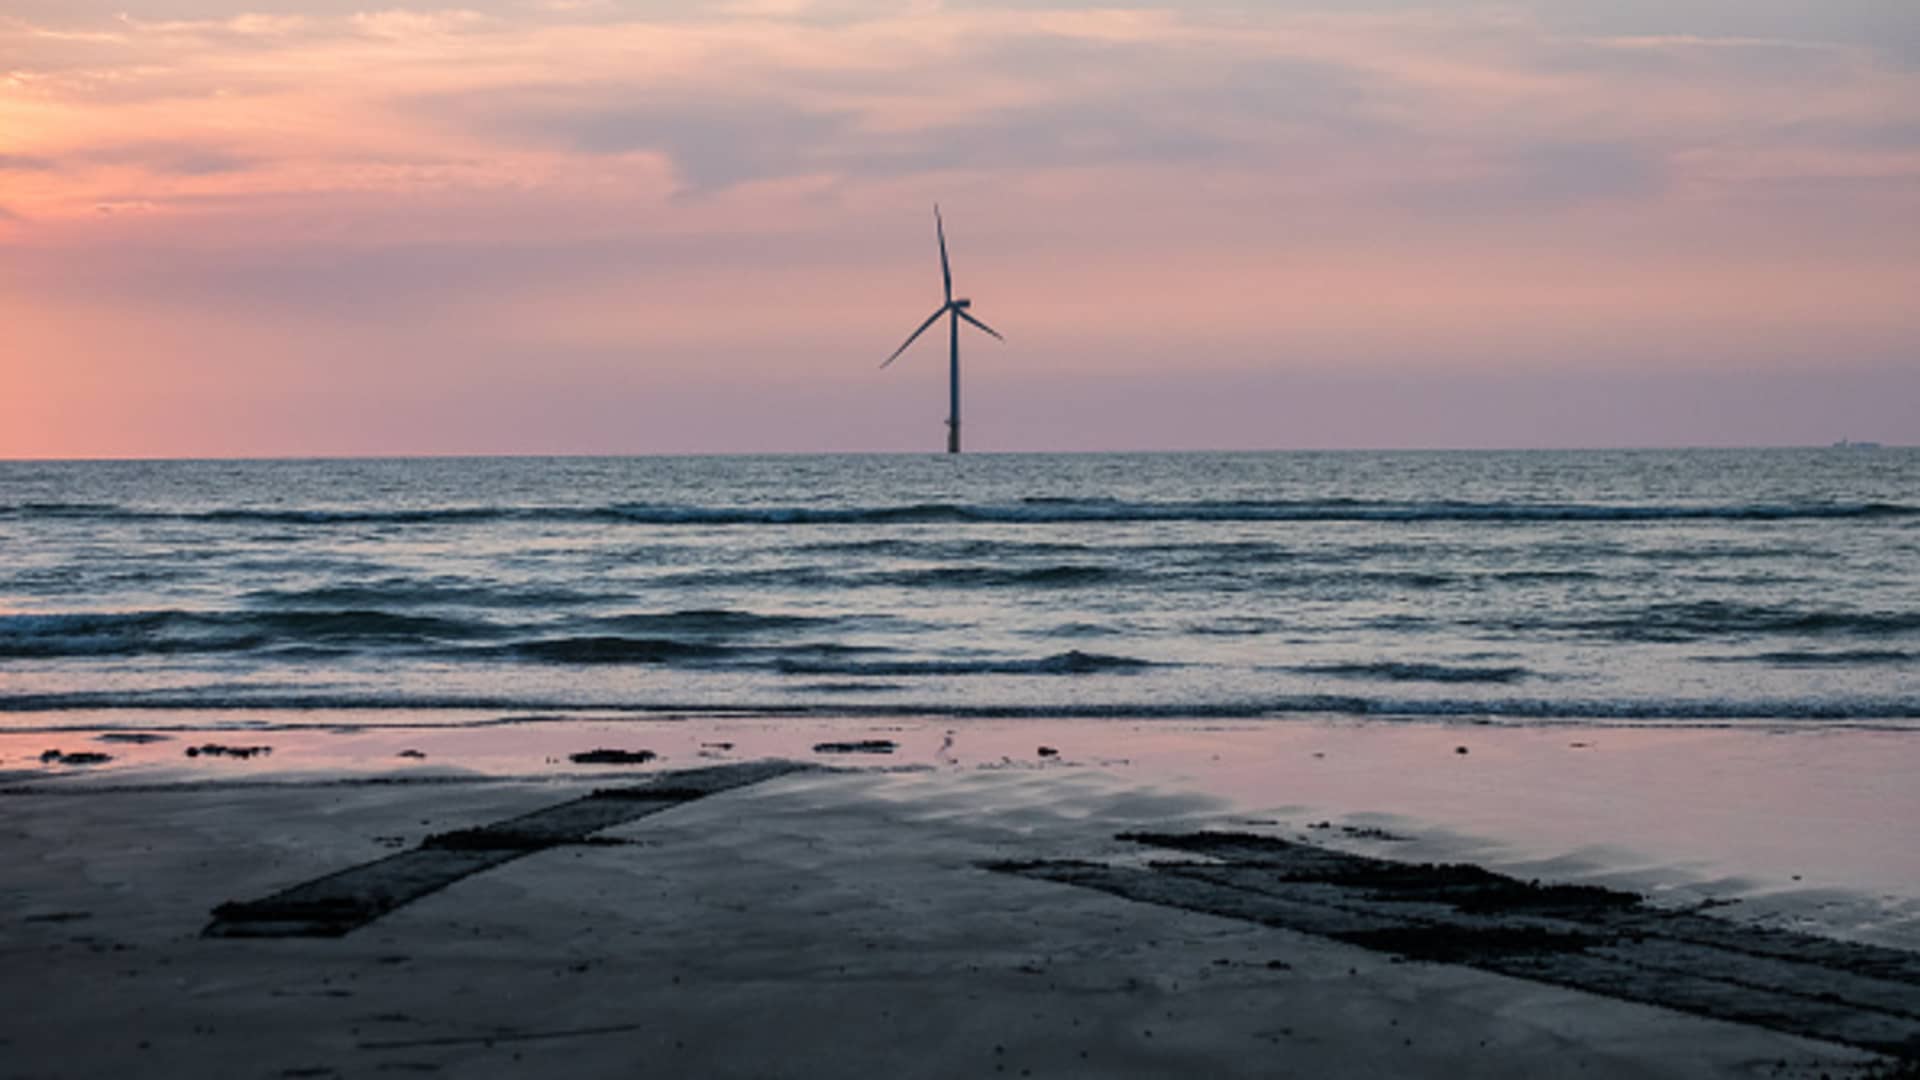 Taiwan’s ‘biggest offshore wind farm’ generates its first power